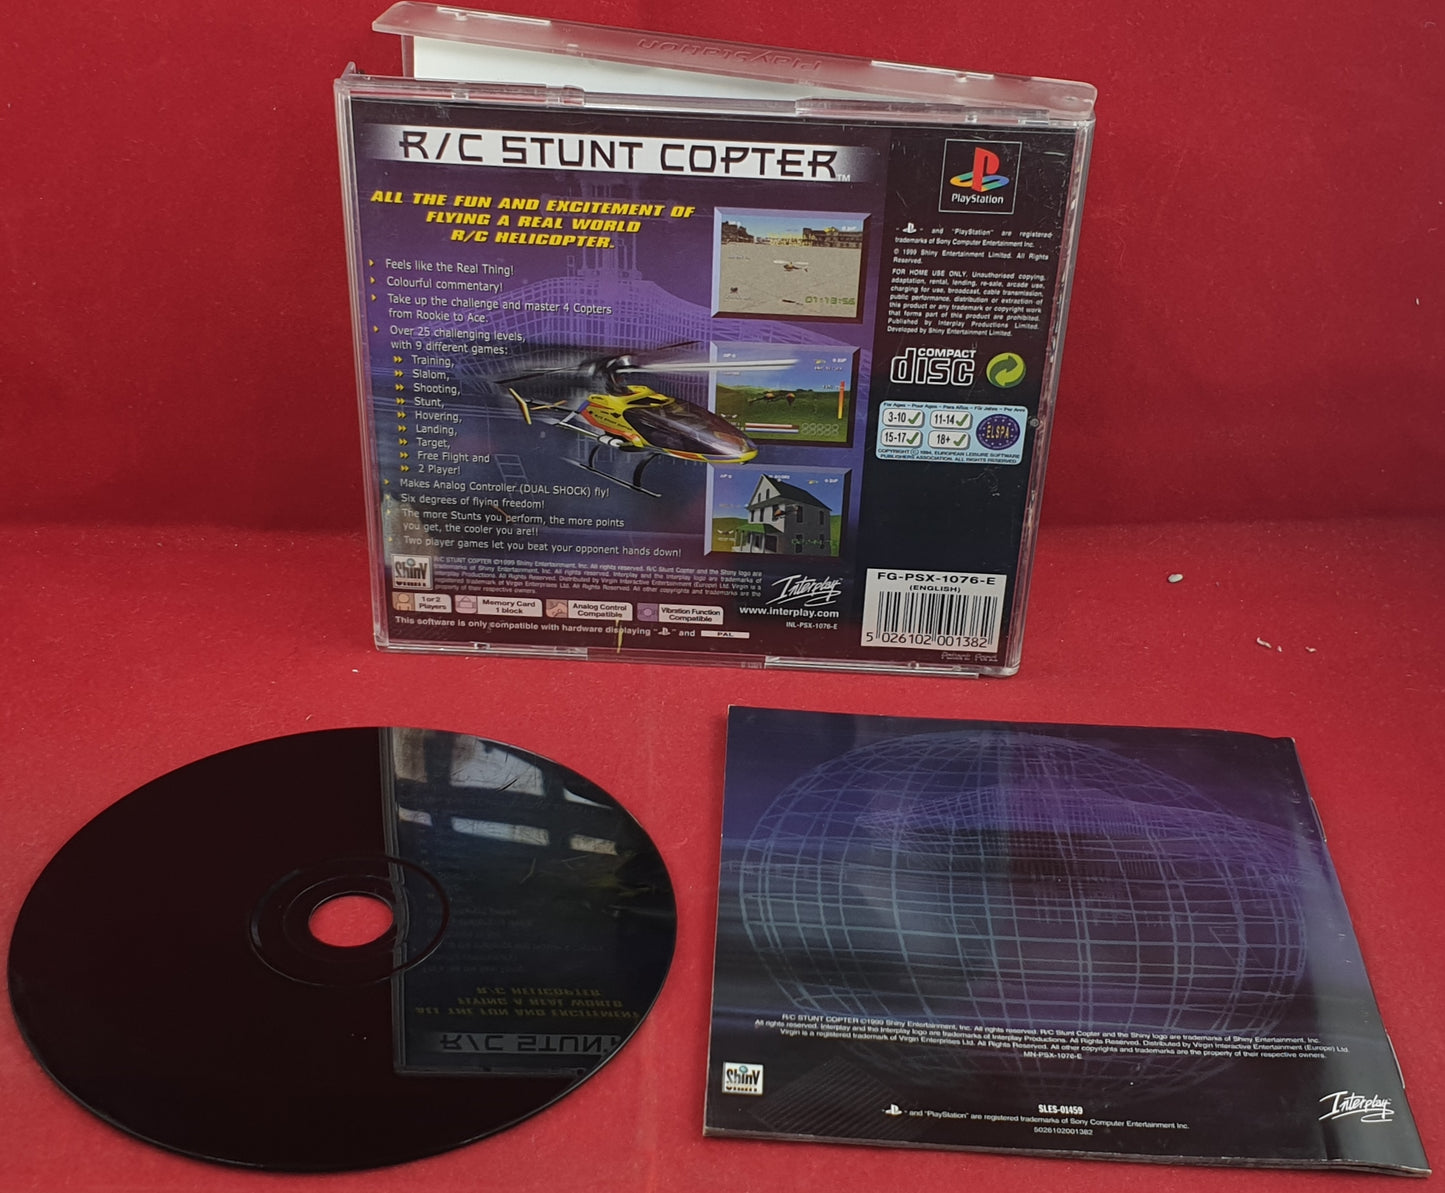 R/C Stunt Copter Sony Playstation 1 (PS1) Game